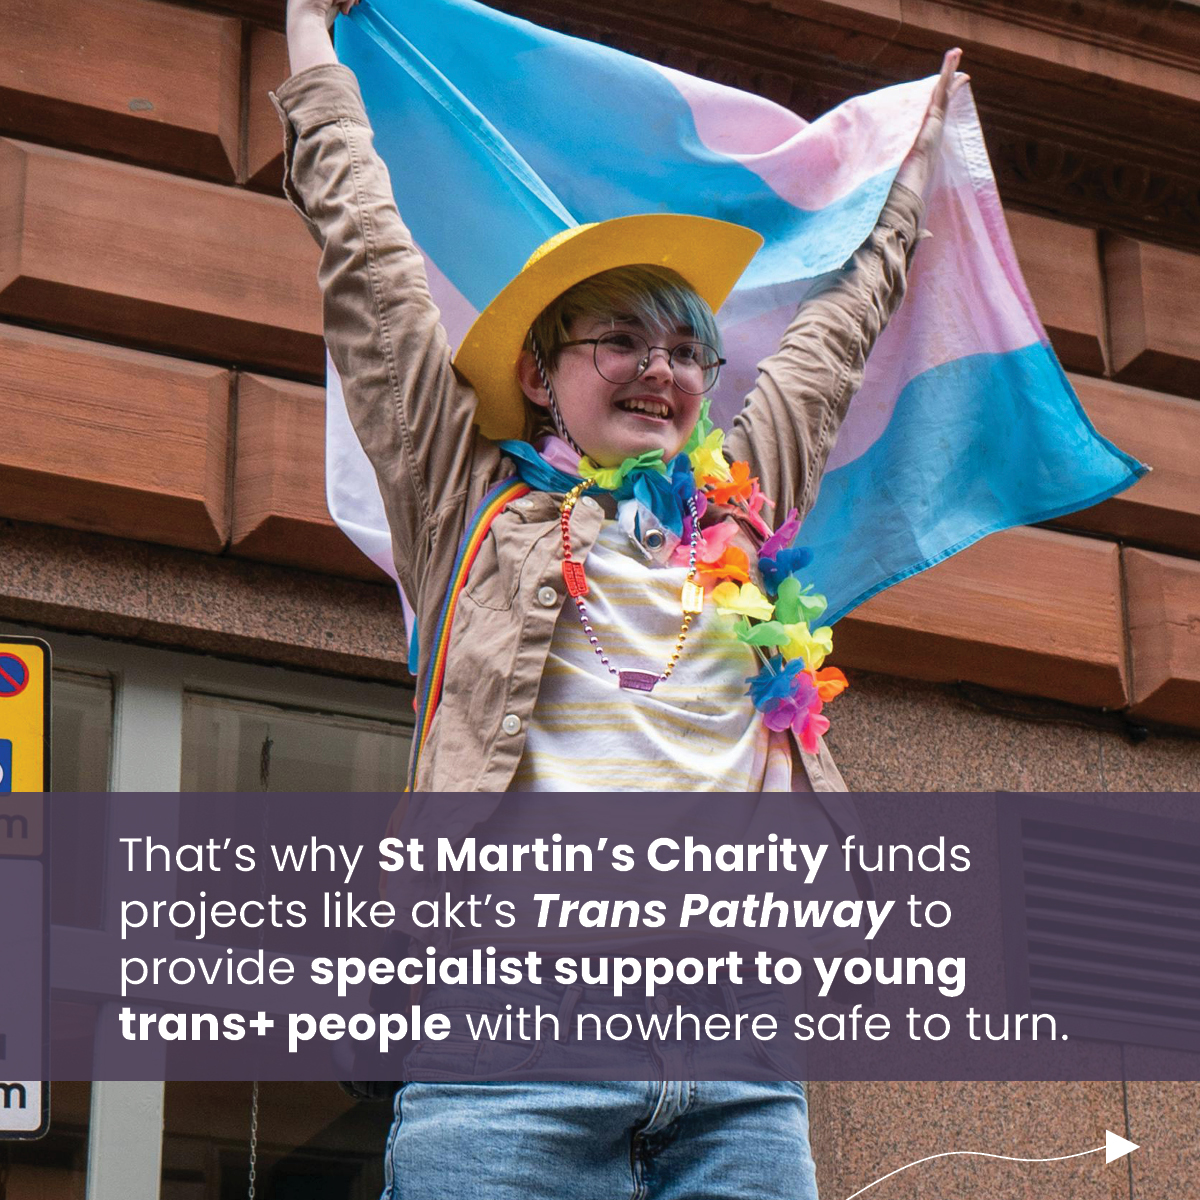 This #TransDayOfVisibility, we’re putting a spotlight on the work done by @akt’s Trans Pathway, a project funded by St Martin-in-the-Fields Charity’s Frontline Fund. The project has supported over 70 trans+ young people to date. Read more: loom.ly/nXPI-GI